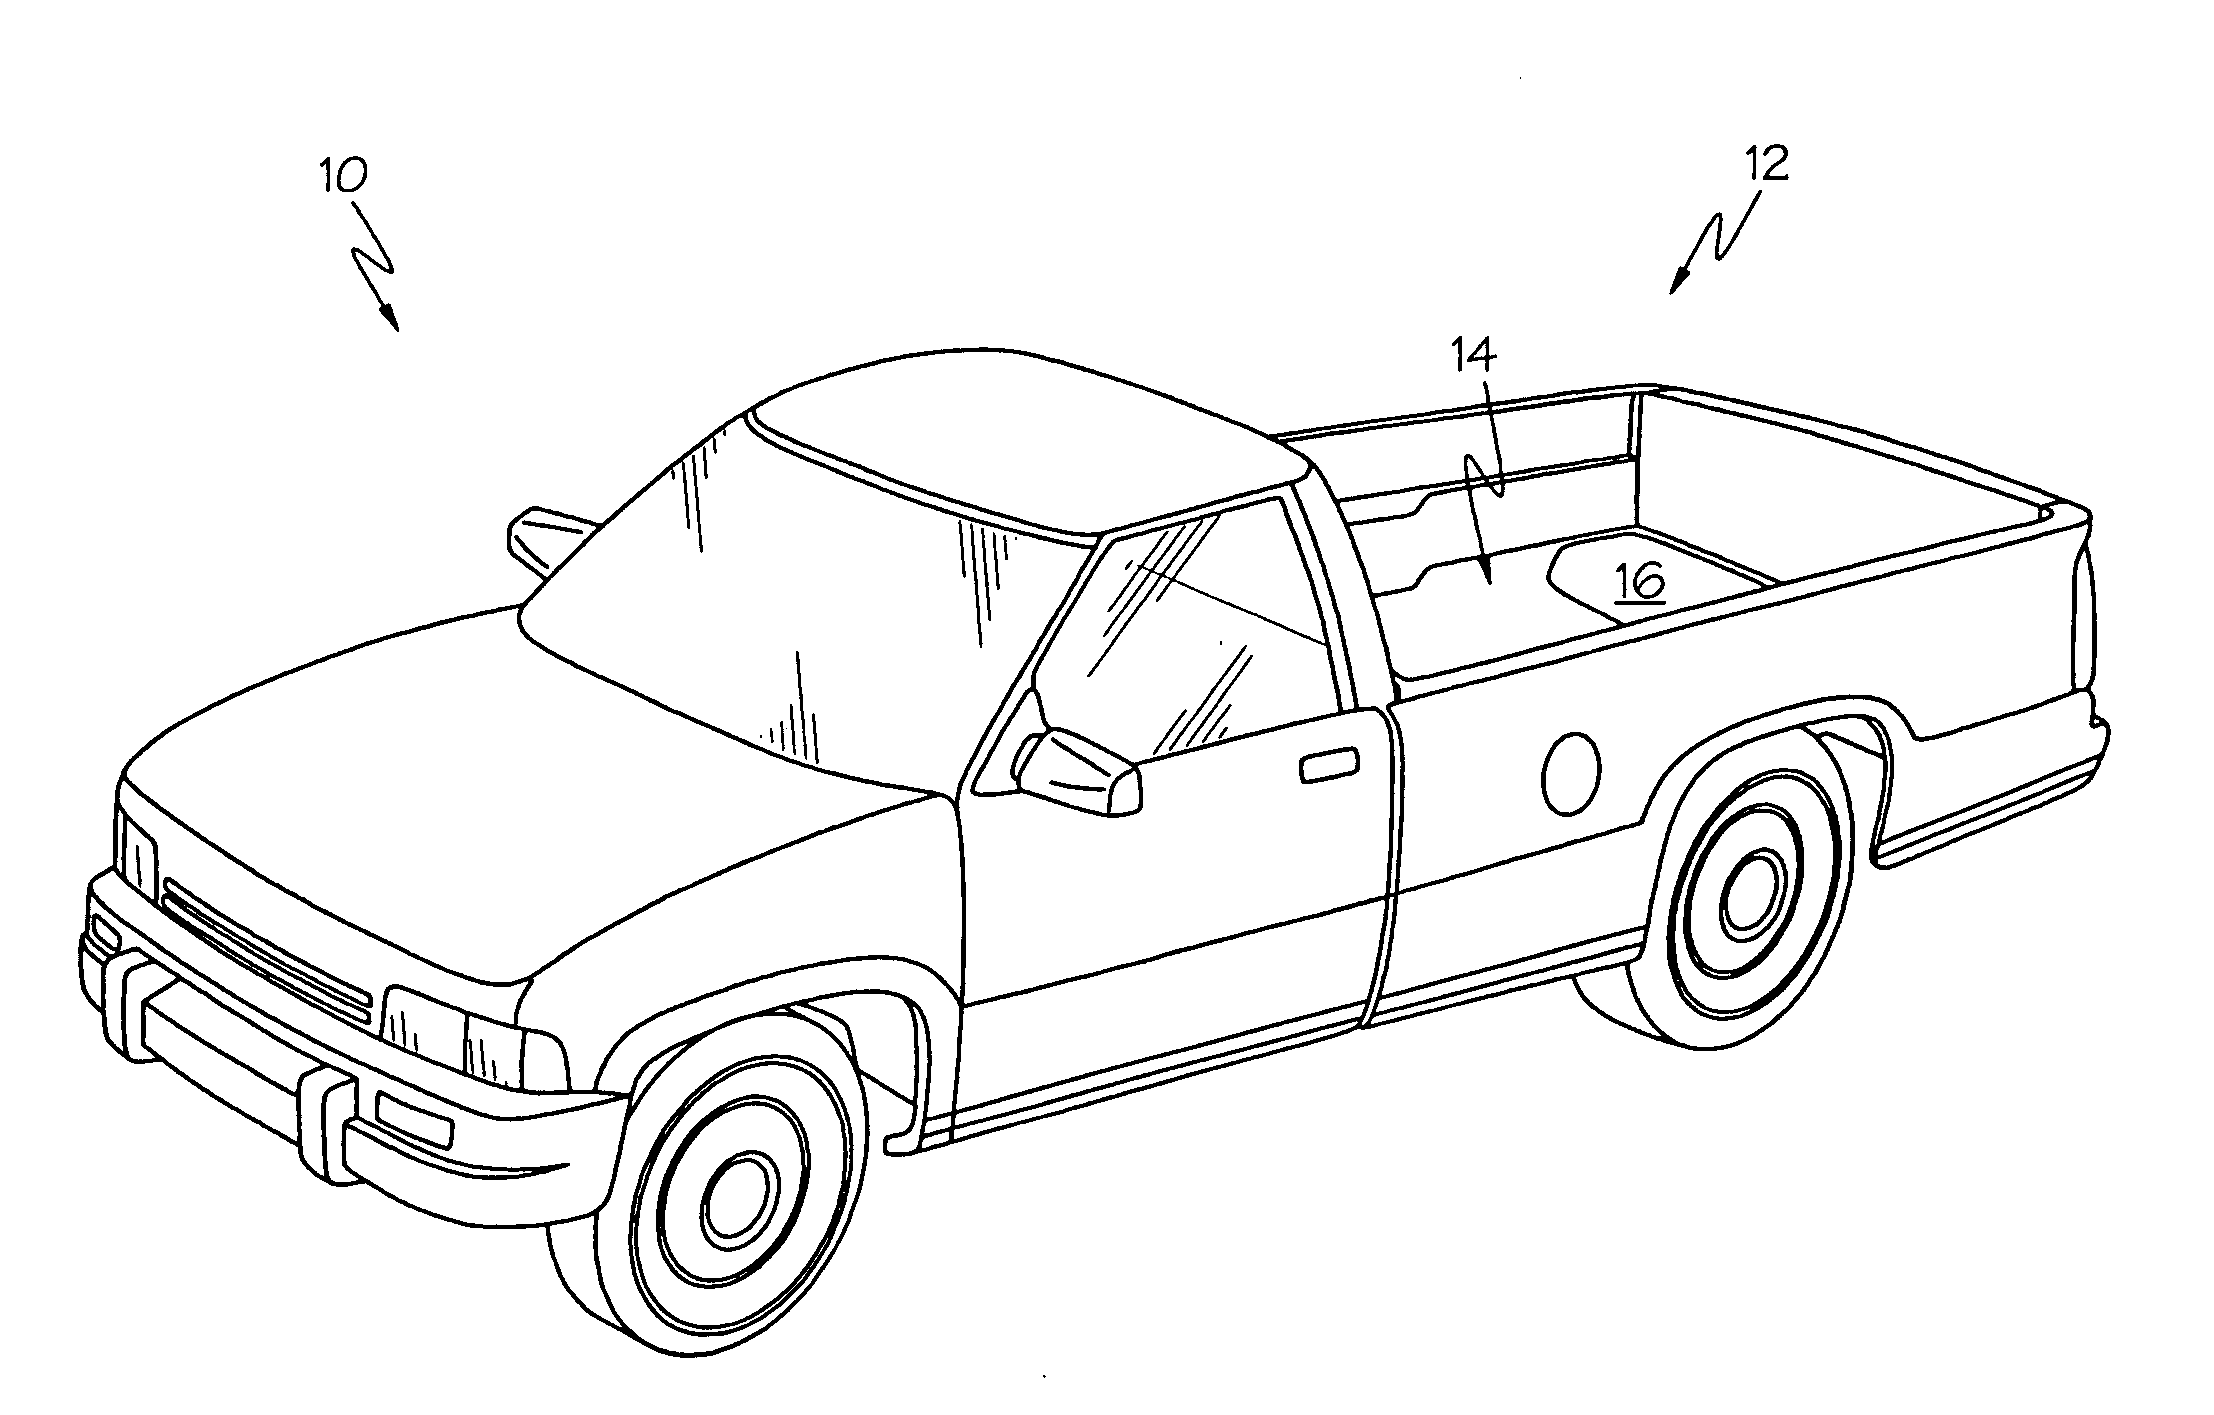 Support structure for a spare tire on a vehicle